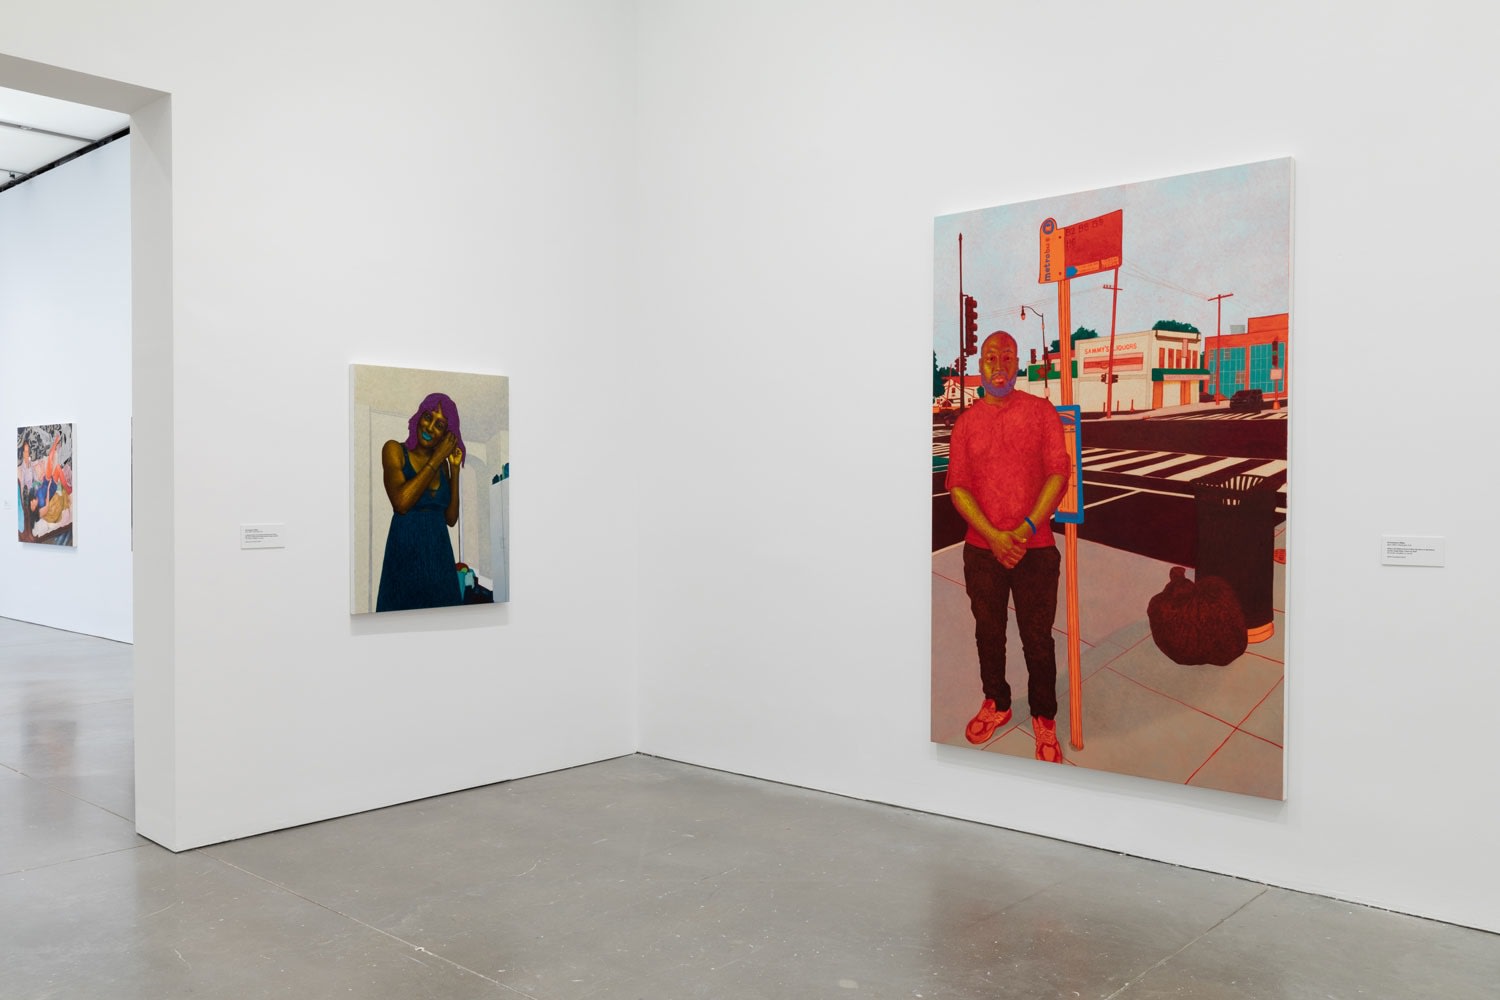 A Place for Me: Figurative Painting Now, Institute of Contemporary Art/Boston, Boston, MA